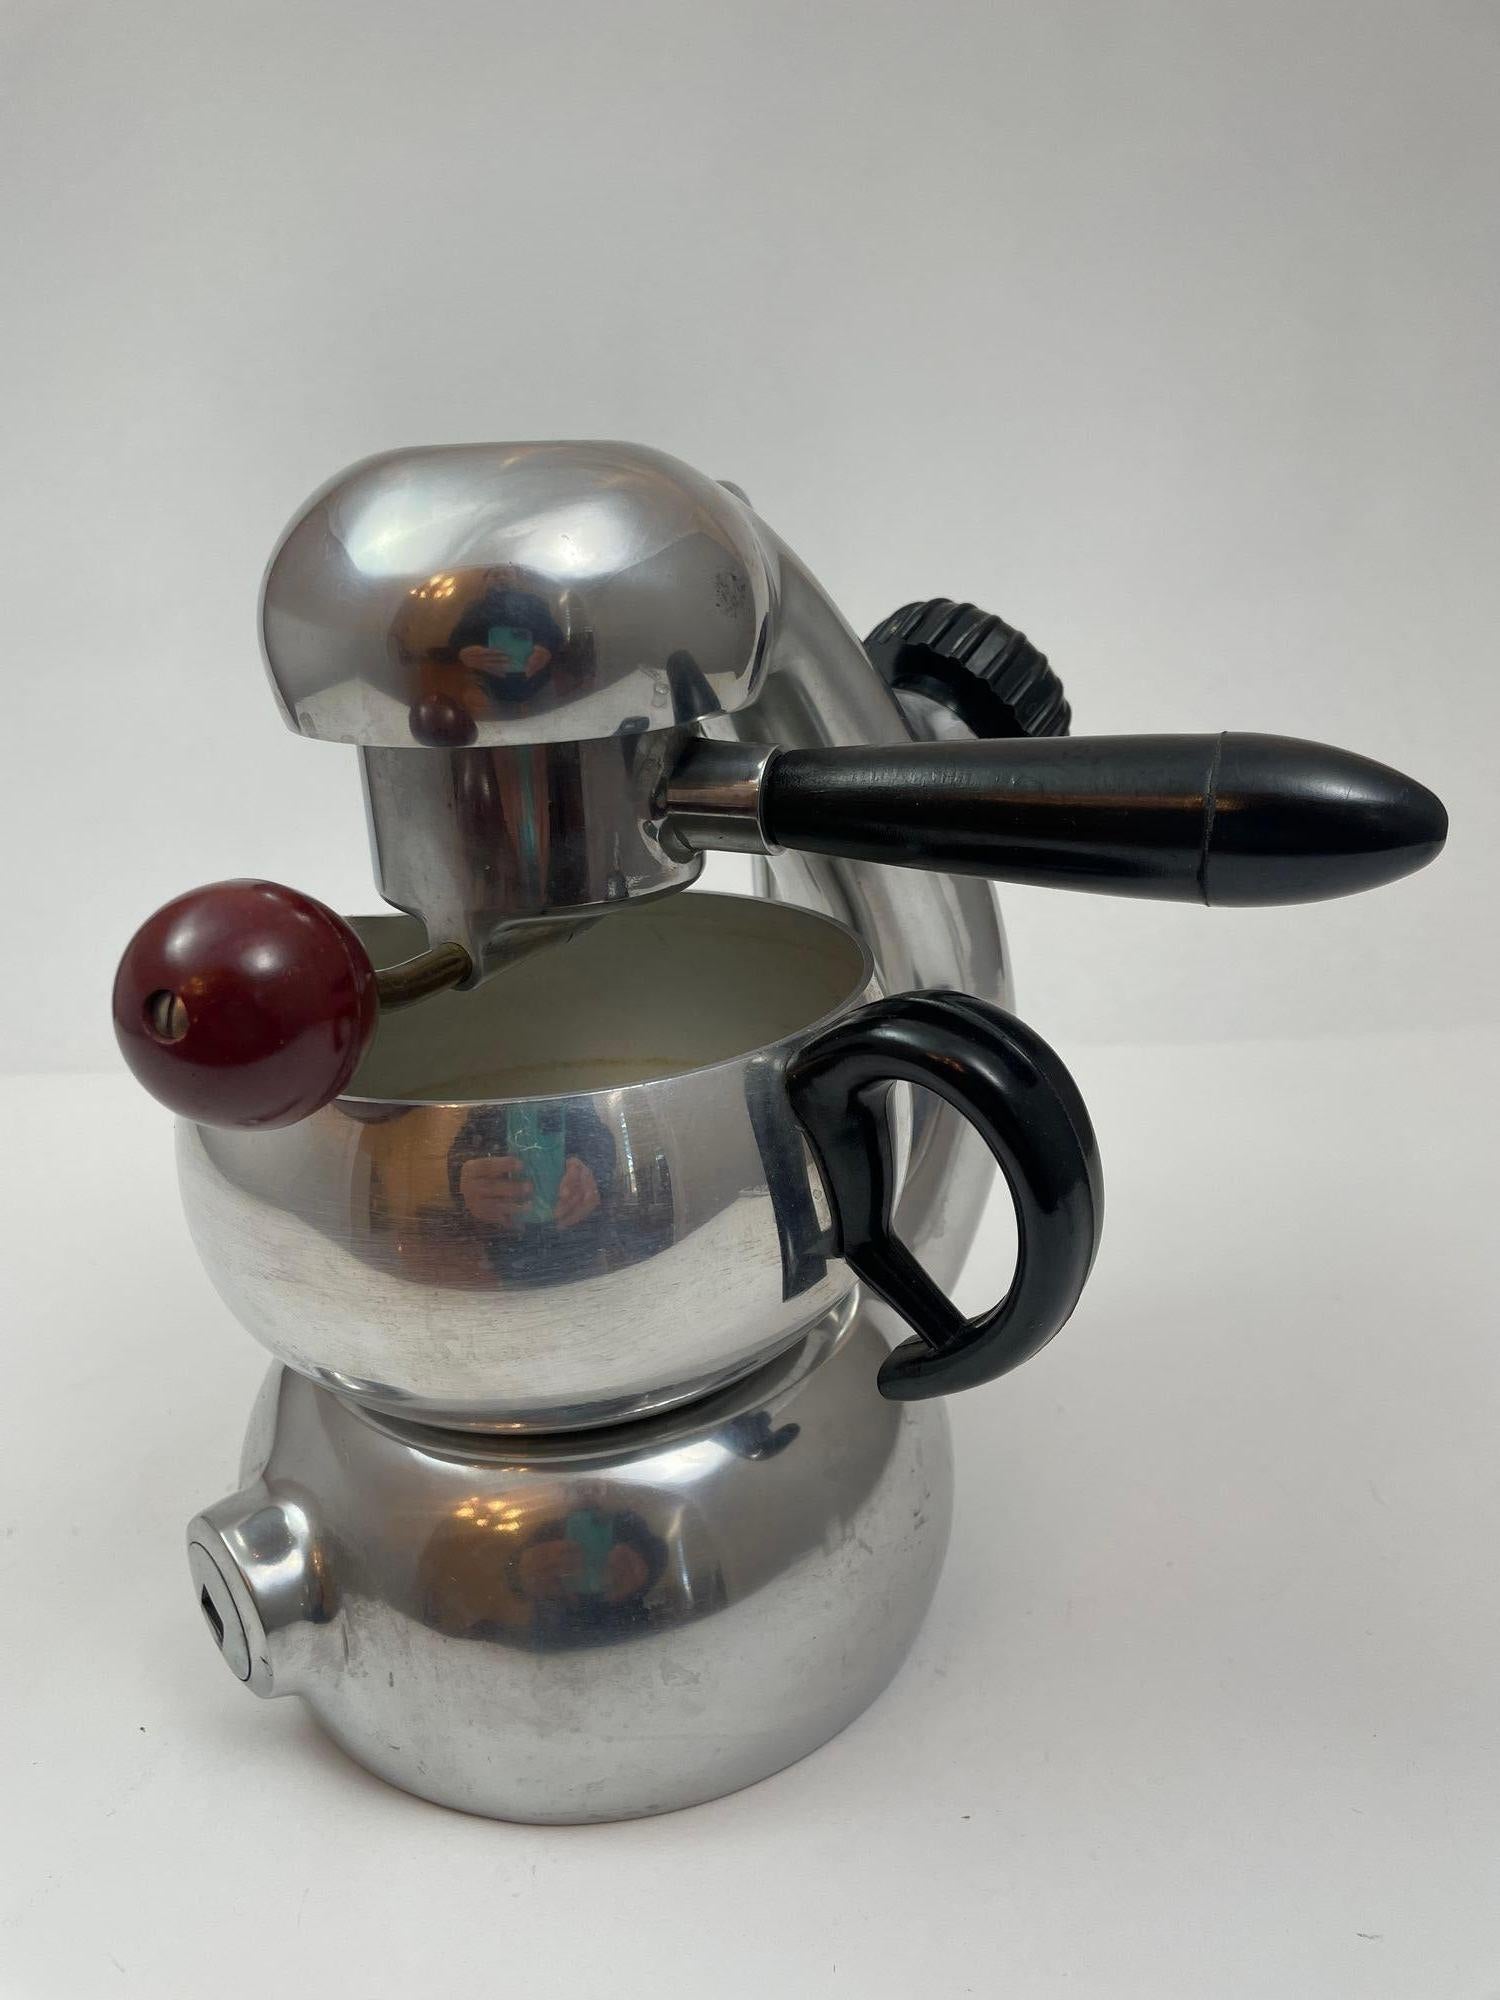 Vintage Giordano Robbiati's iconic Atomic coffee maker, originating from the 1950s, embodies a blend of vintage charm and robust functionality. Crafted with sleek curved lines and enduring mechanical prowess, this Brevetti Robbiati Milano creation